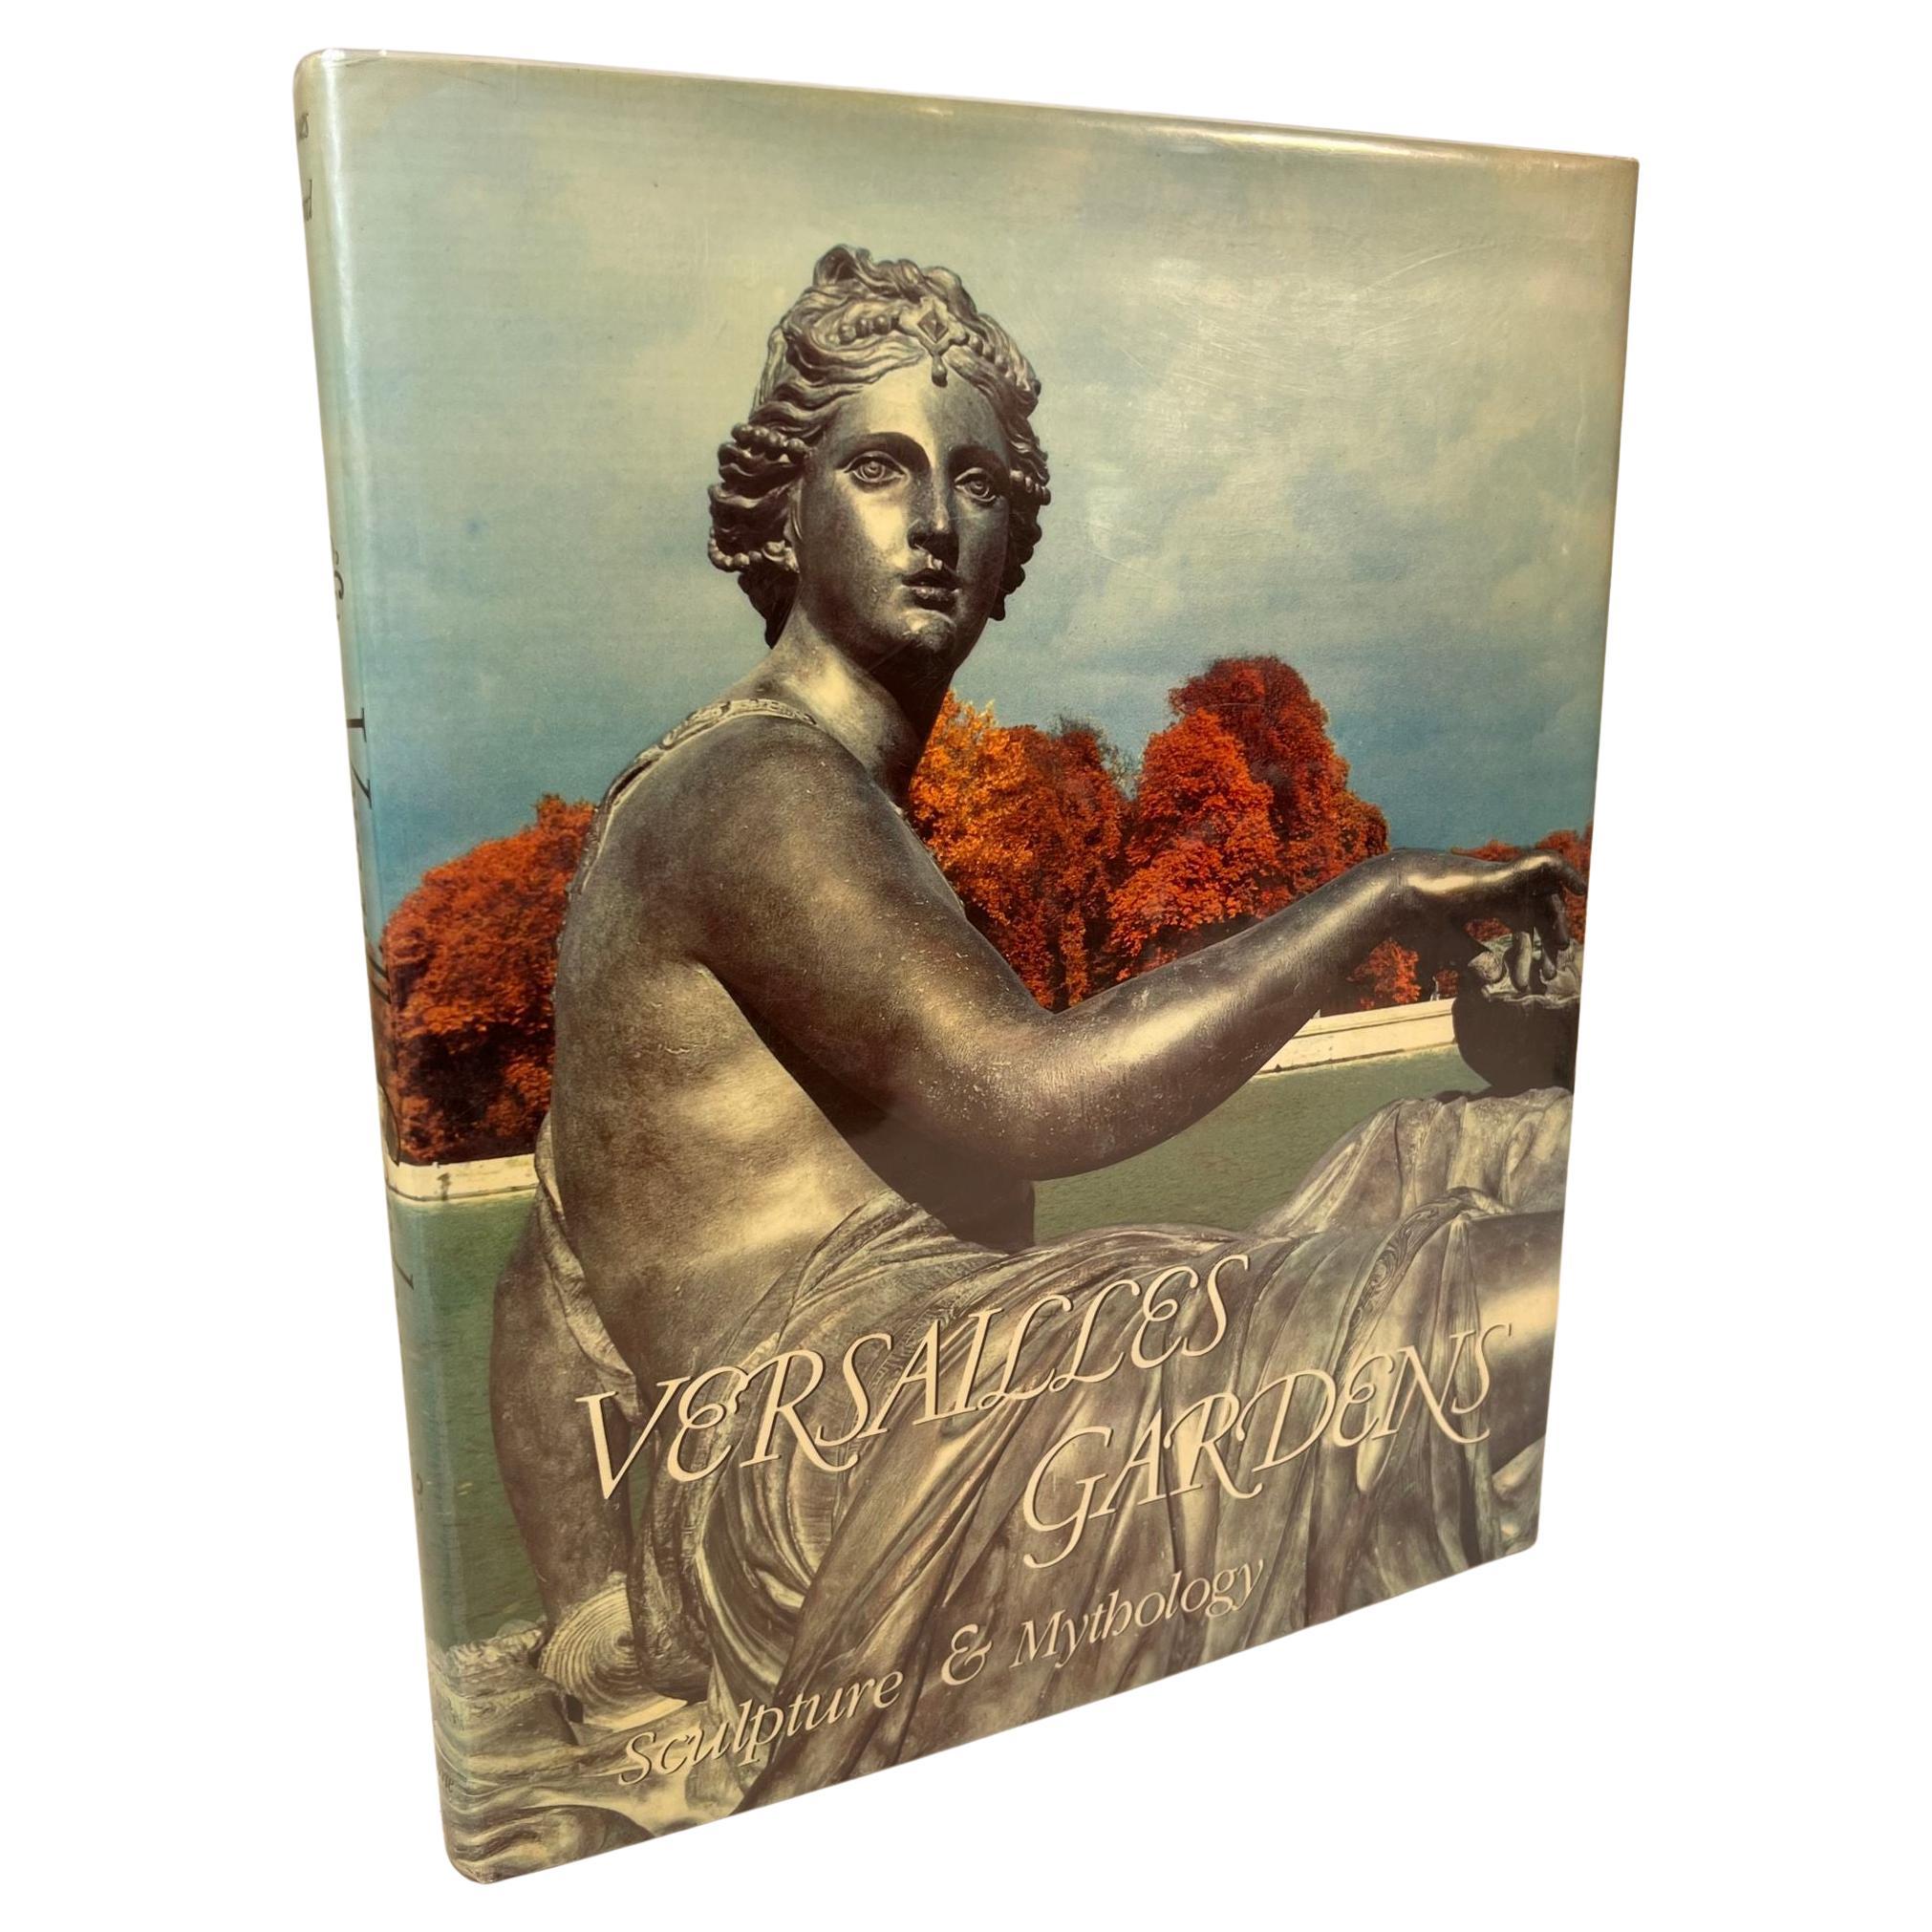 Versailles Gardens Sculpture And Mythology By Jacques Girard 1st Ed. 1985 Book For Sale